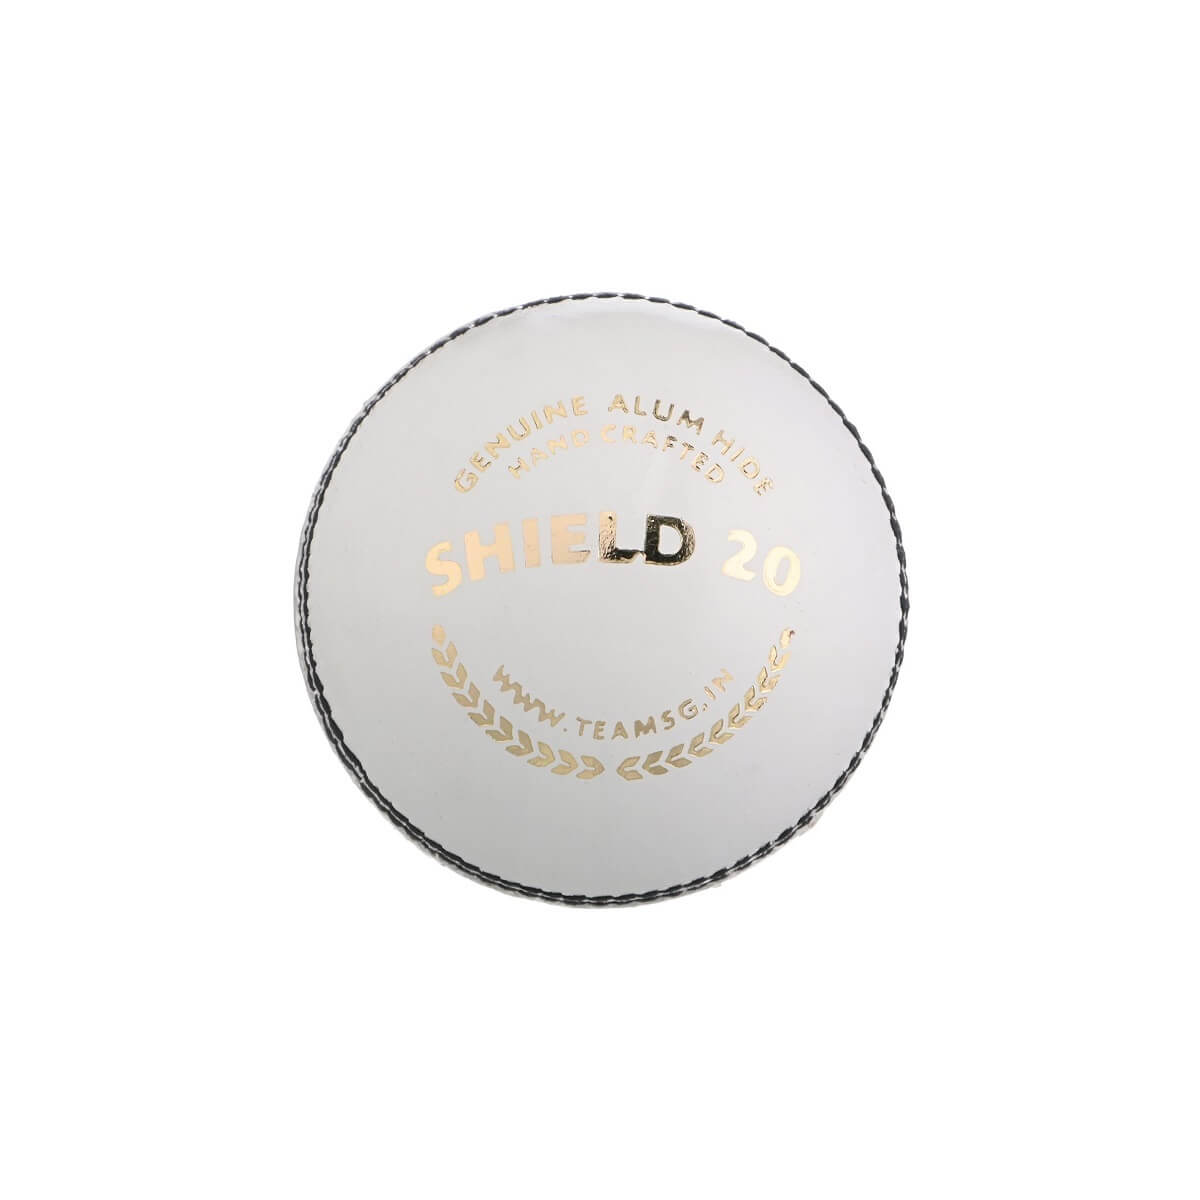 SG Shield 20 White Cricket Leather Ball (Pack of 1 or 6)